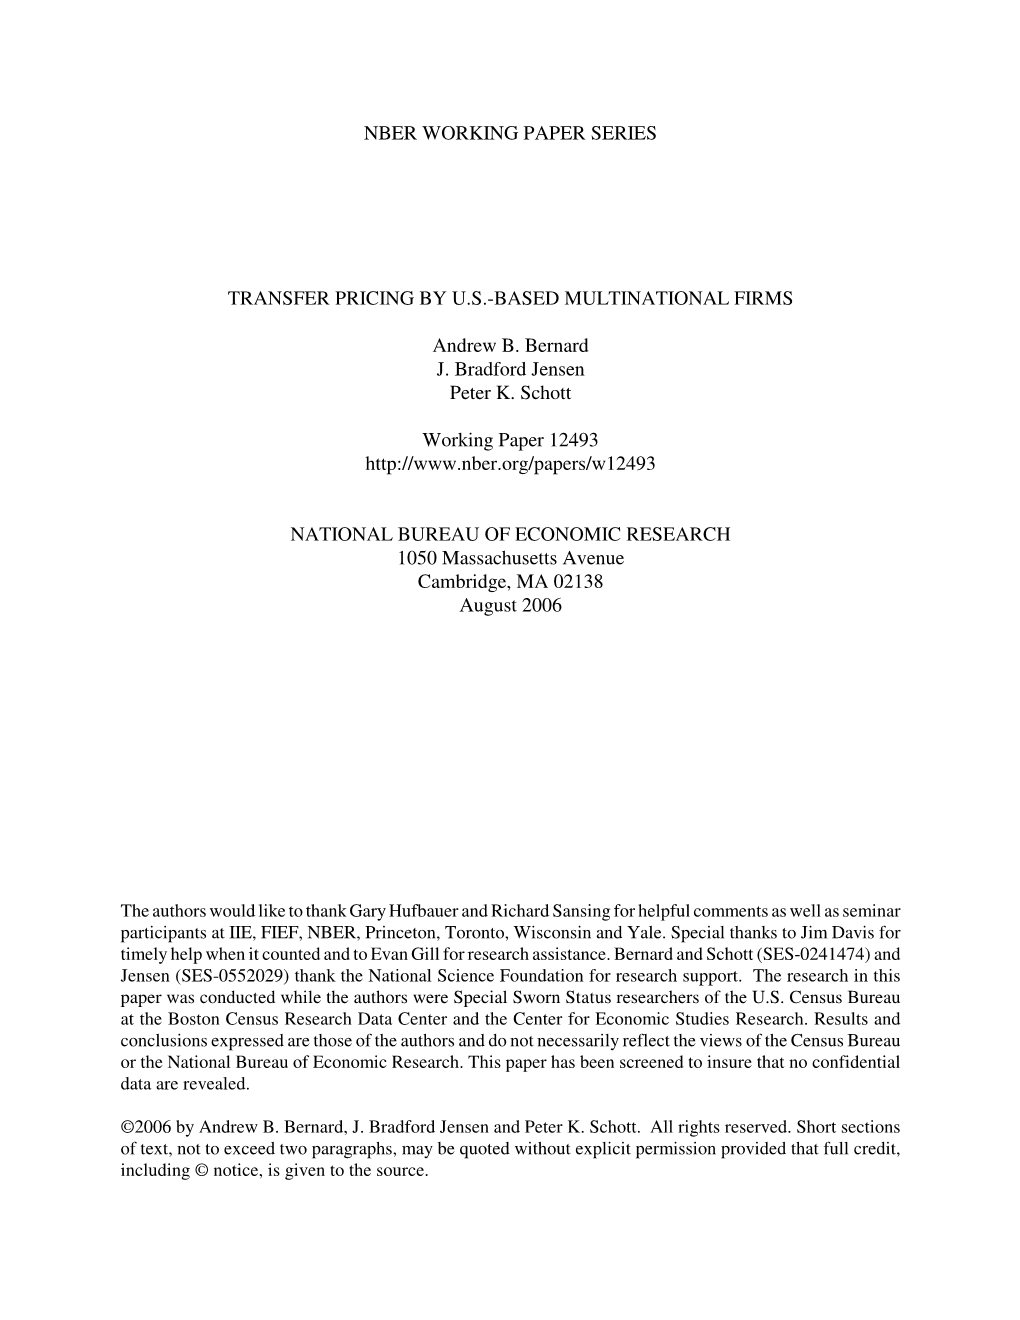 Nber Working Paper Series Transfer Pricing by U.S